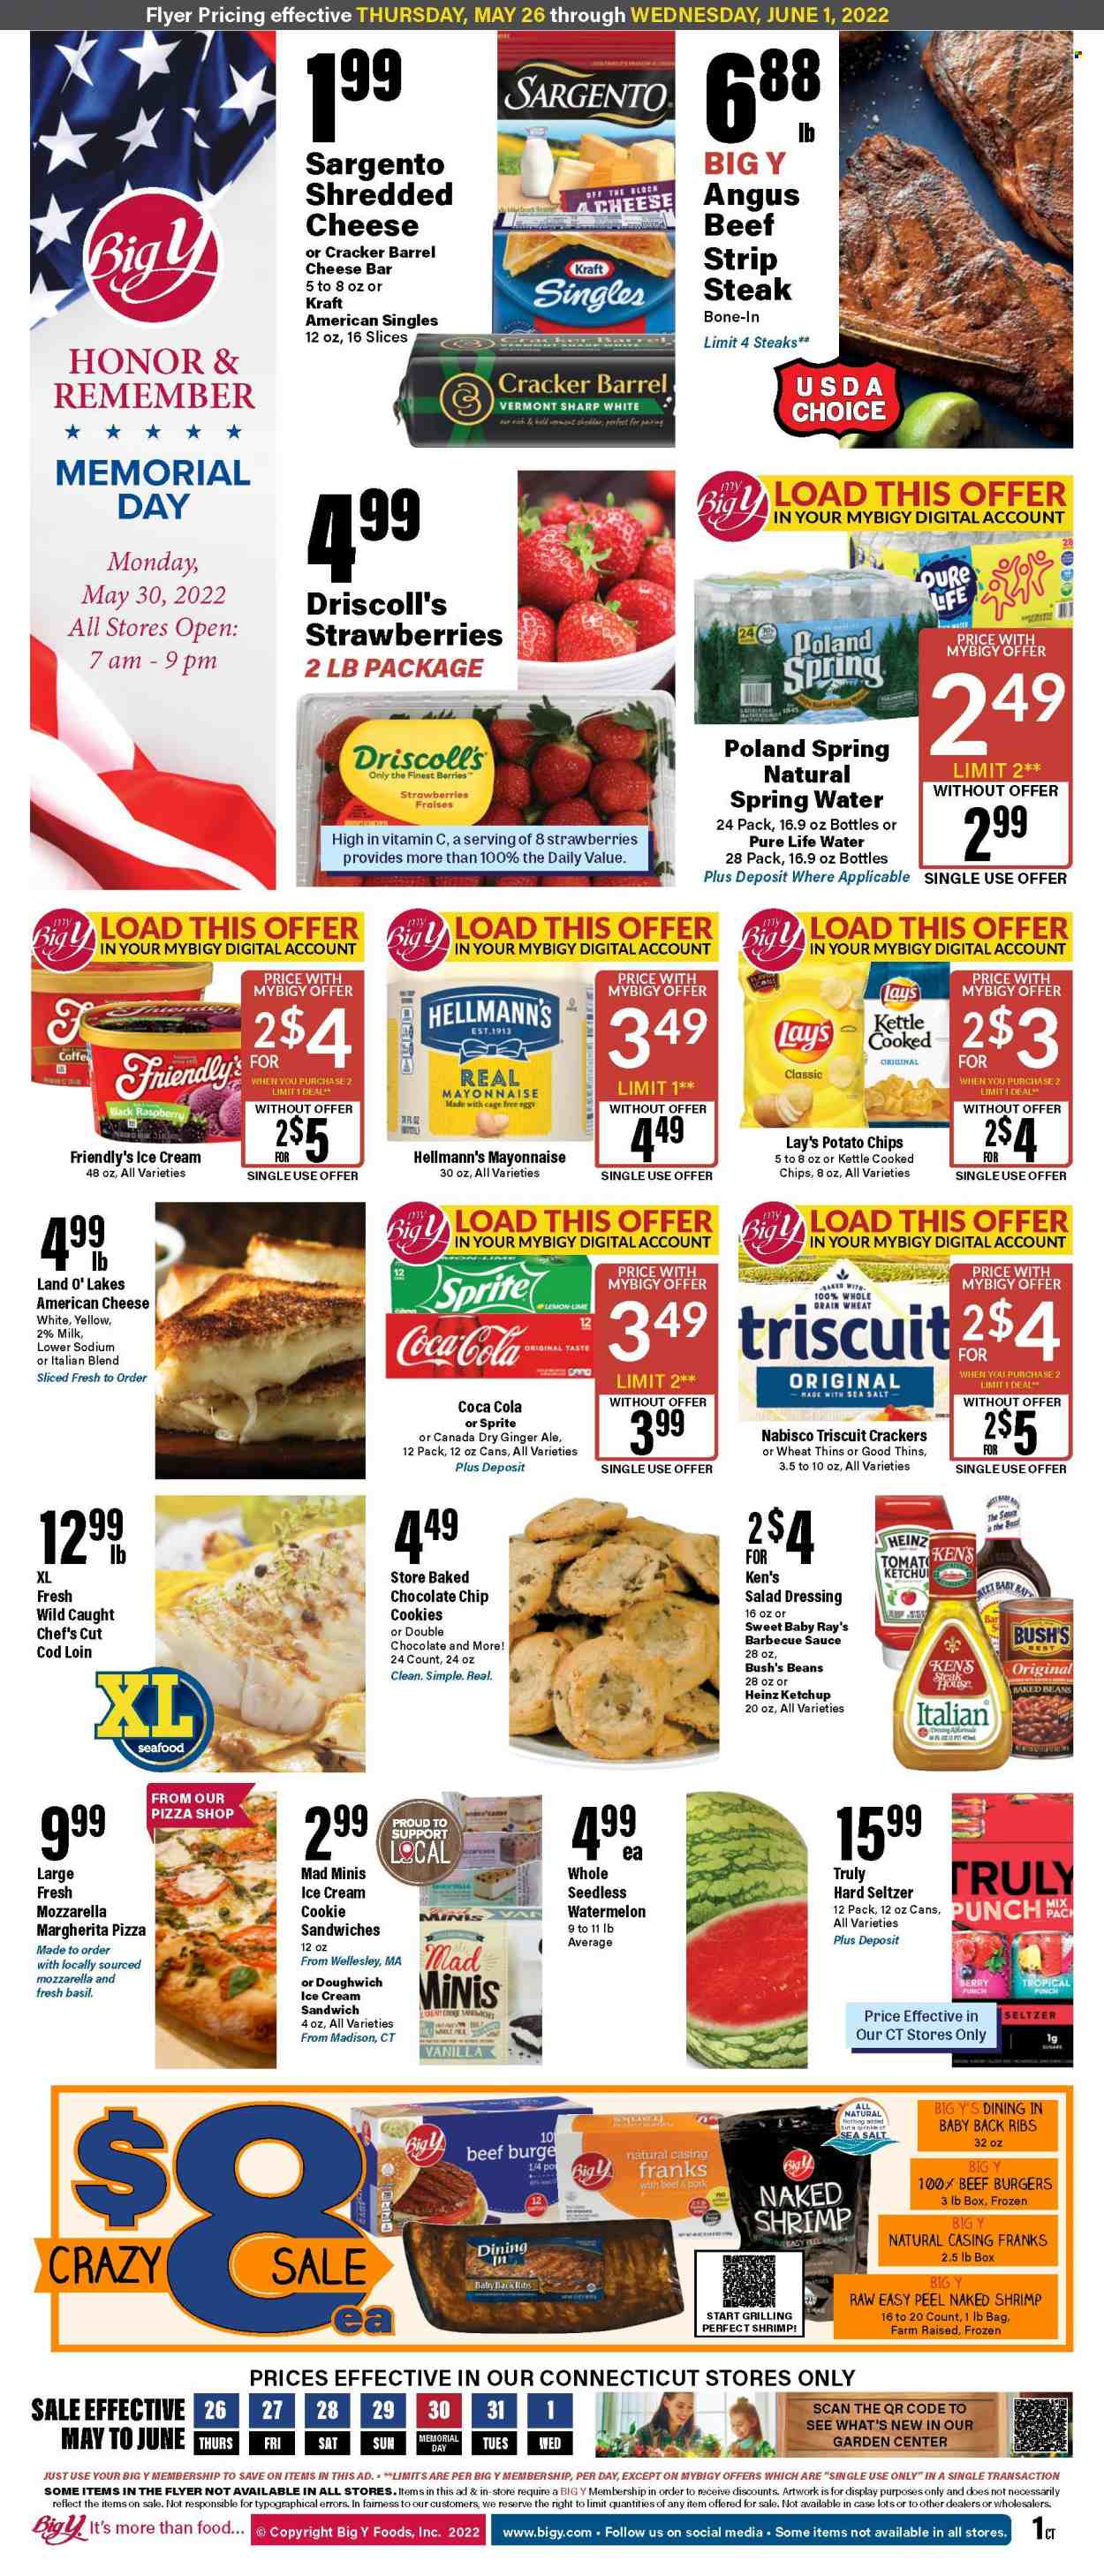 thumbnail - Big Y Flyer - 05/26/2022 - 06/01/2022 - Sales products - beans, strawberries, watermelon, cod, seafood, shrimps, pizza, hamburger, beef burger, Kraft®, american cheese, sandwich slices, shredded cheese, Kraft Singles, Sargento, milk, eggs, cage free eggs, mayonnaise, italian dressing, Hellmann’s, ice cream, ice cream sandwich, Friendly's Ice Cream, cookies, crackers, potato chips, Lay’s, Thins, Heinz, baked beans, esponja, BBQ sauce, salad dressing, ketchup, dressing, marinade, Canada Dry, Coca-Cola, ginger ale, Sprite, fruit punch, spring water, Pure Life Water, Hard Seltzer, TRULY, Sol, beef meat, steak, striploin steak, pork meat, pork ribs, pork back ribs, vitamin c. Page 1.